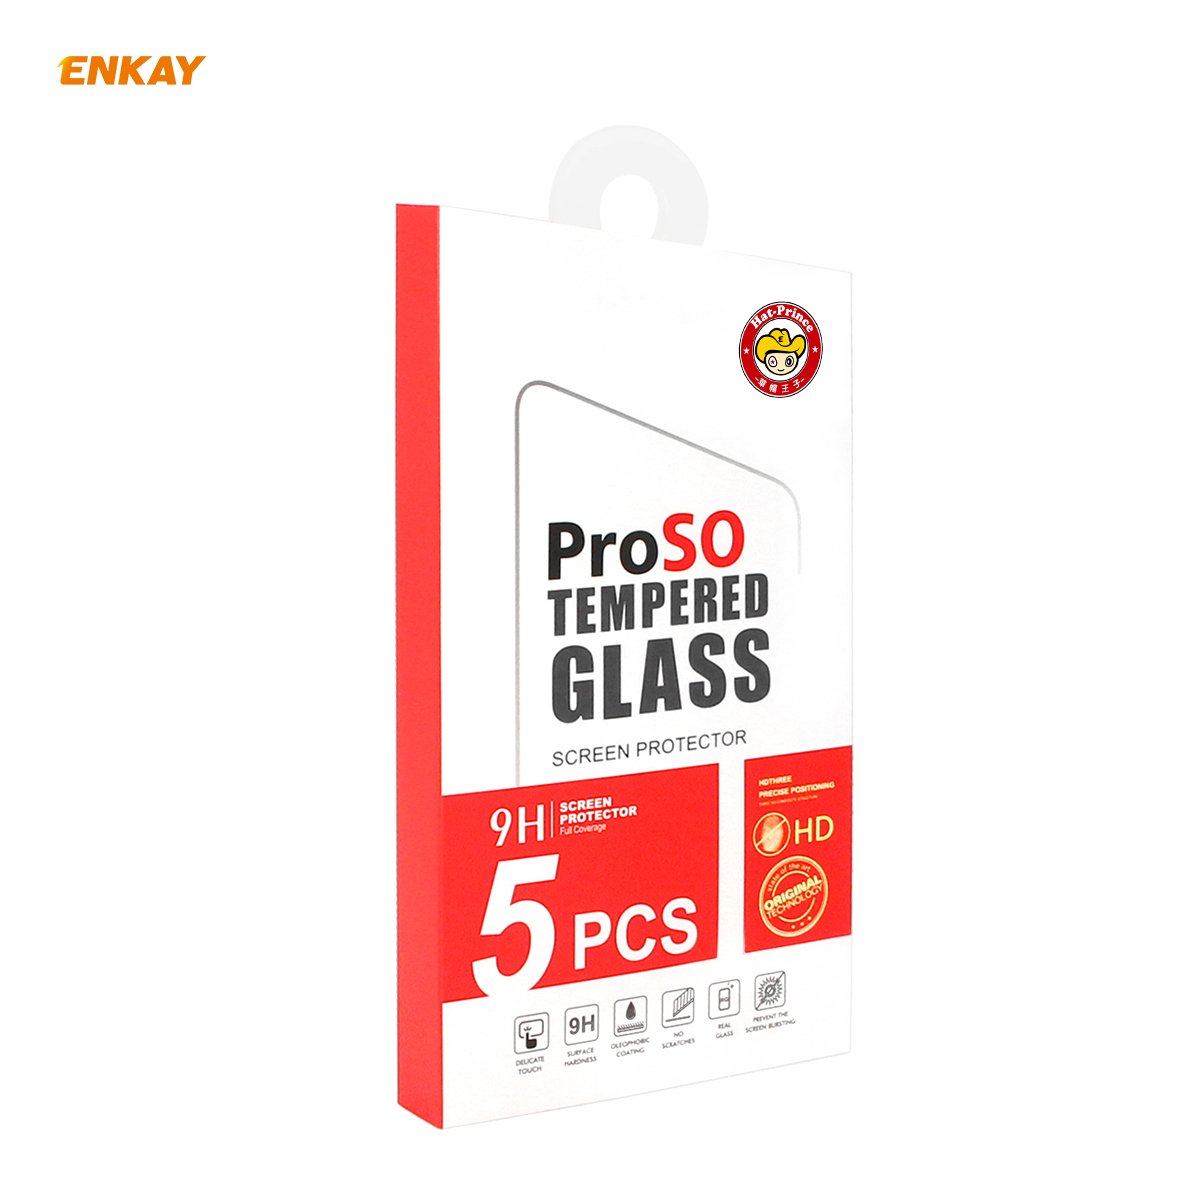 ENKAY-12510-Pcs-9H-Crystal-Clear-Anti-Explosion-Anti-Scratch-Full-Glue-Full-Coverage-Tempered-Glass--1751426-12